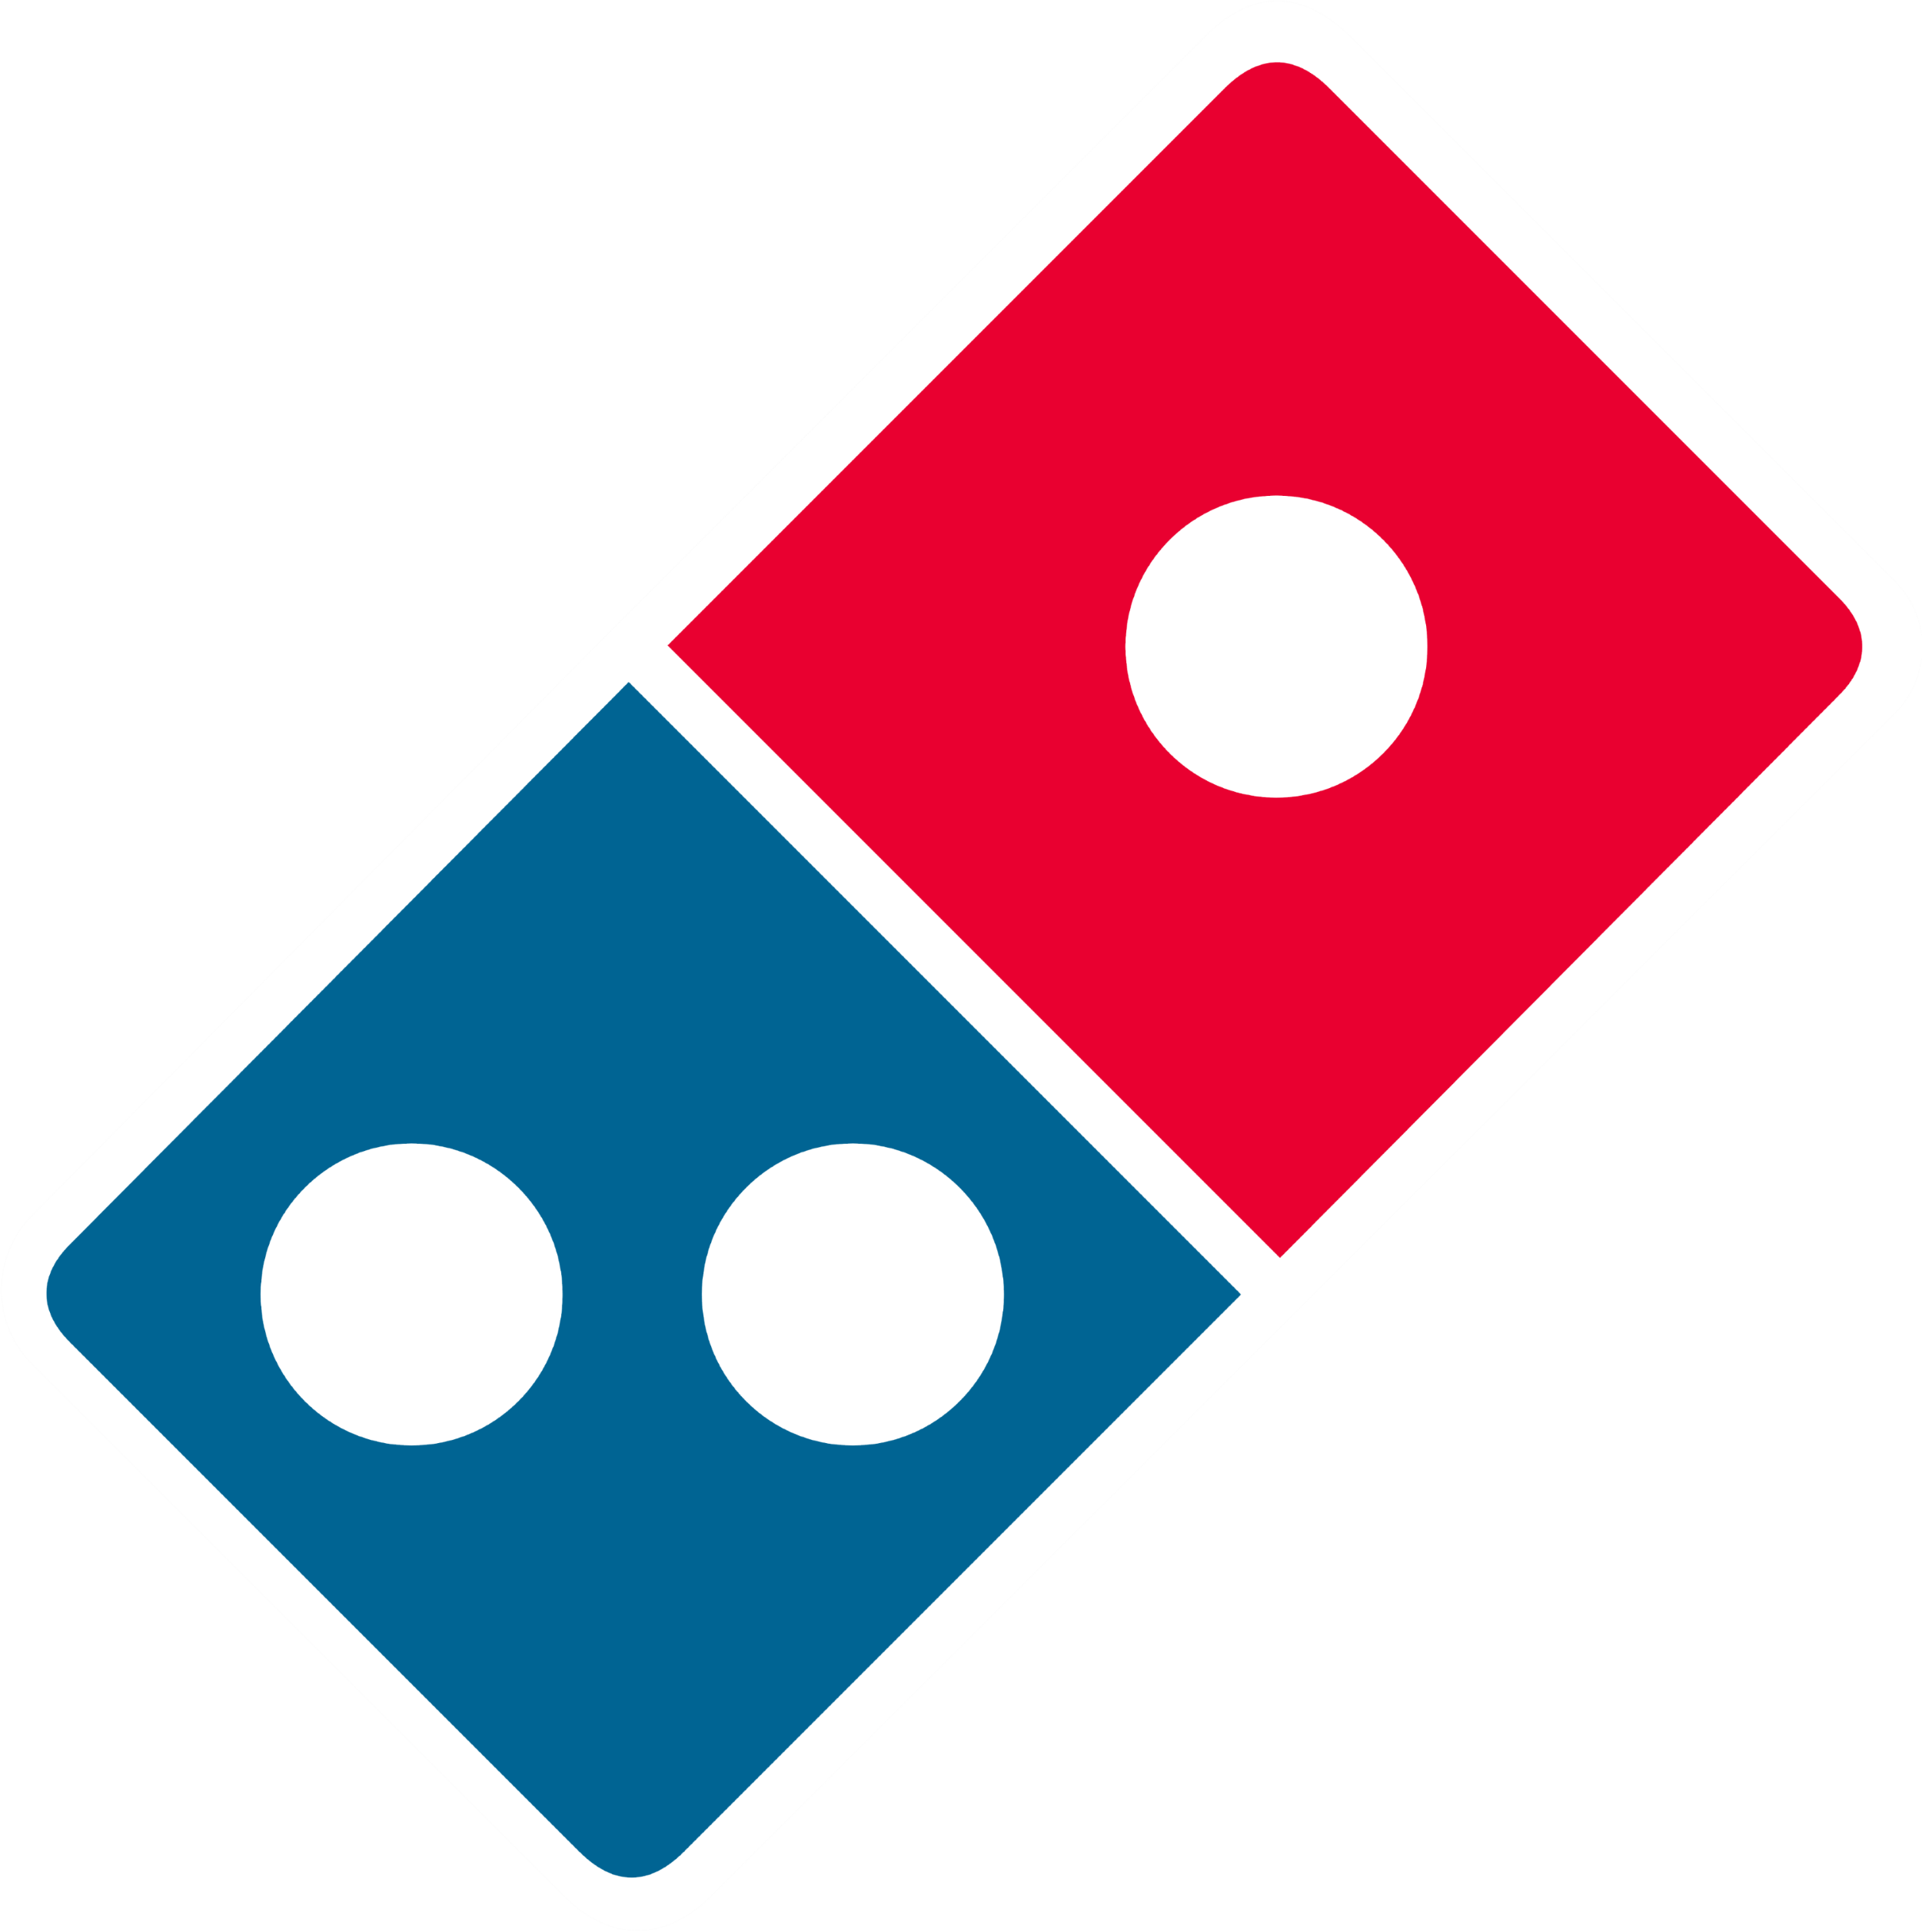 Domino’s Mission and Vision Statement Analysis